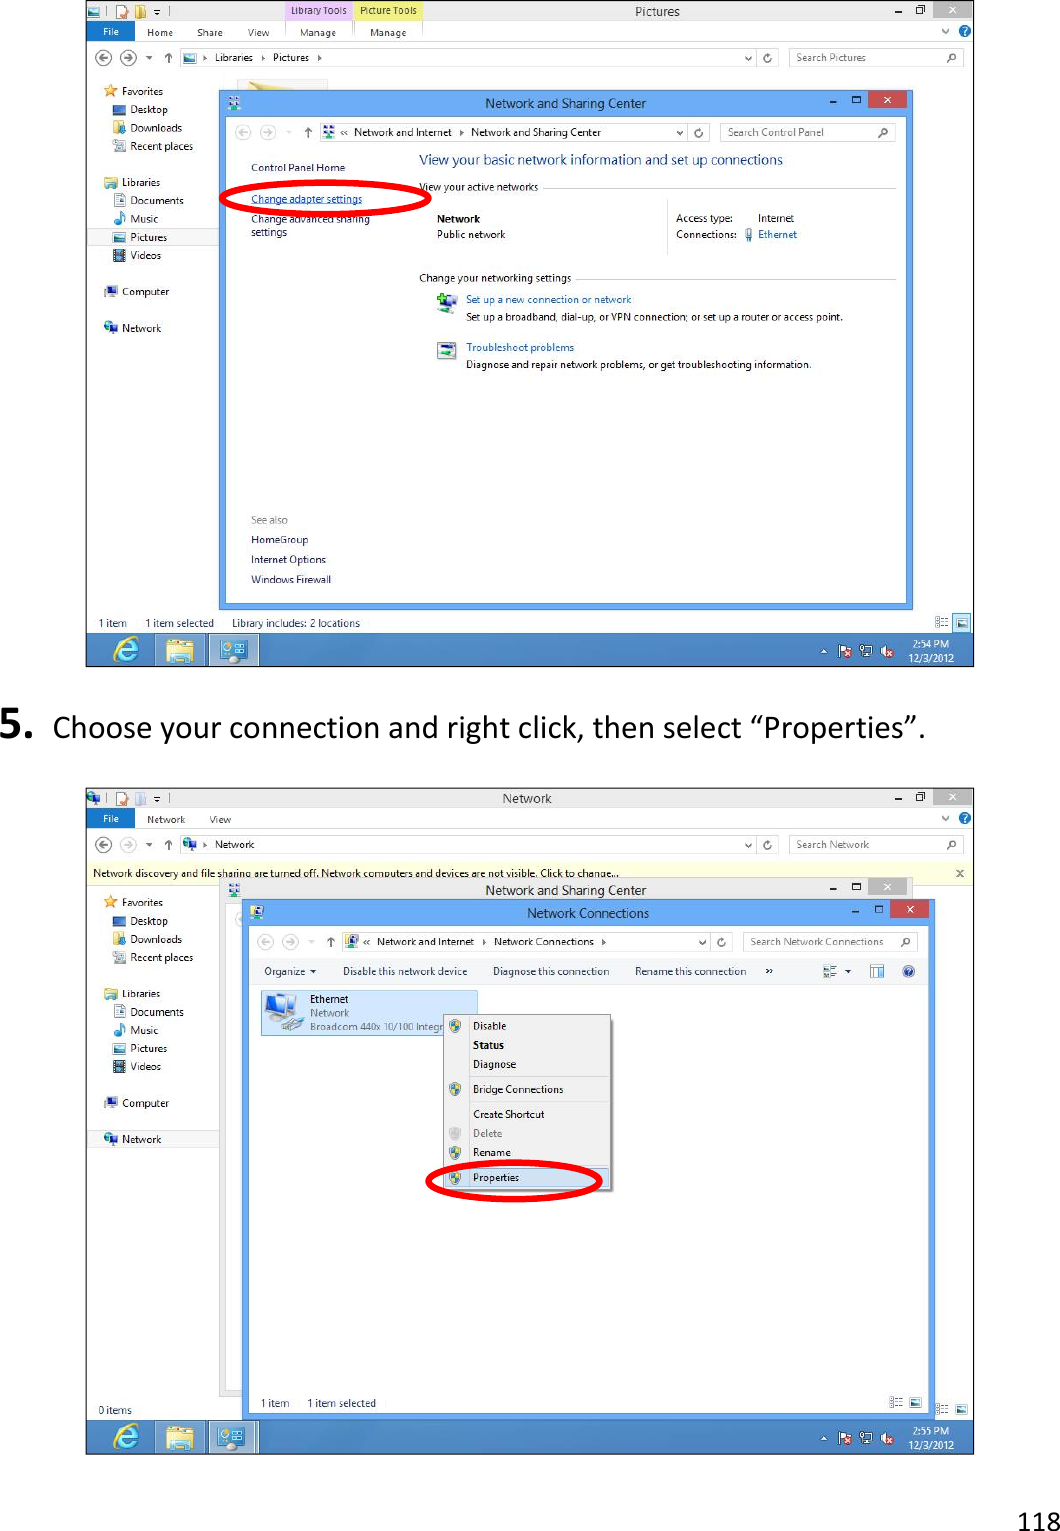 118     5.   Choose your connection and right click, then select “Properties”.    